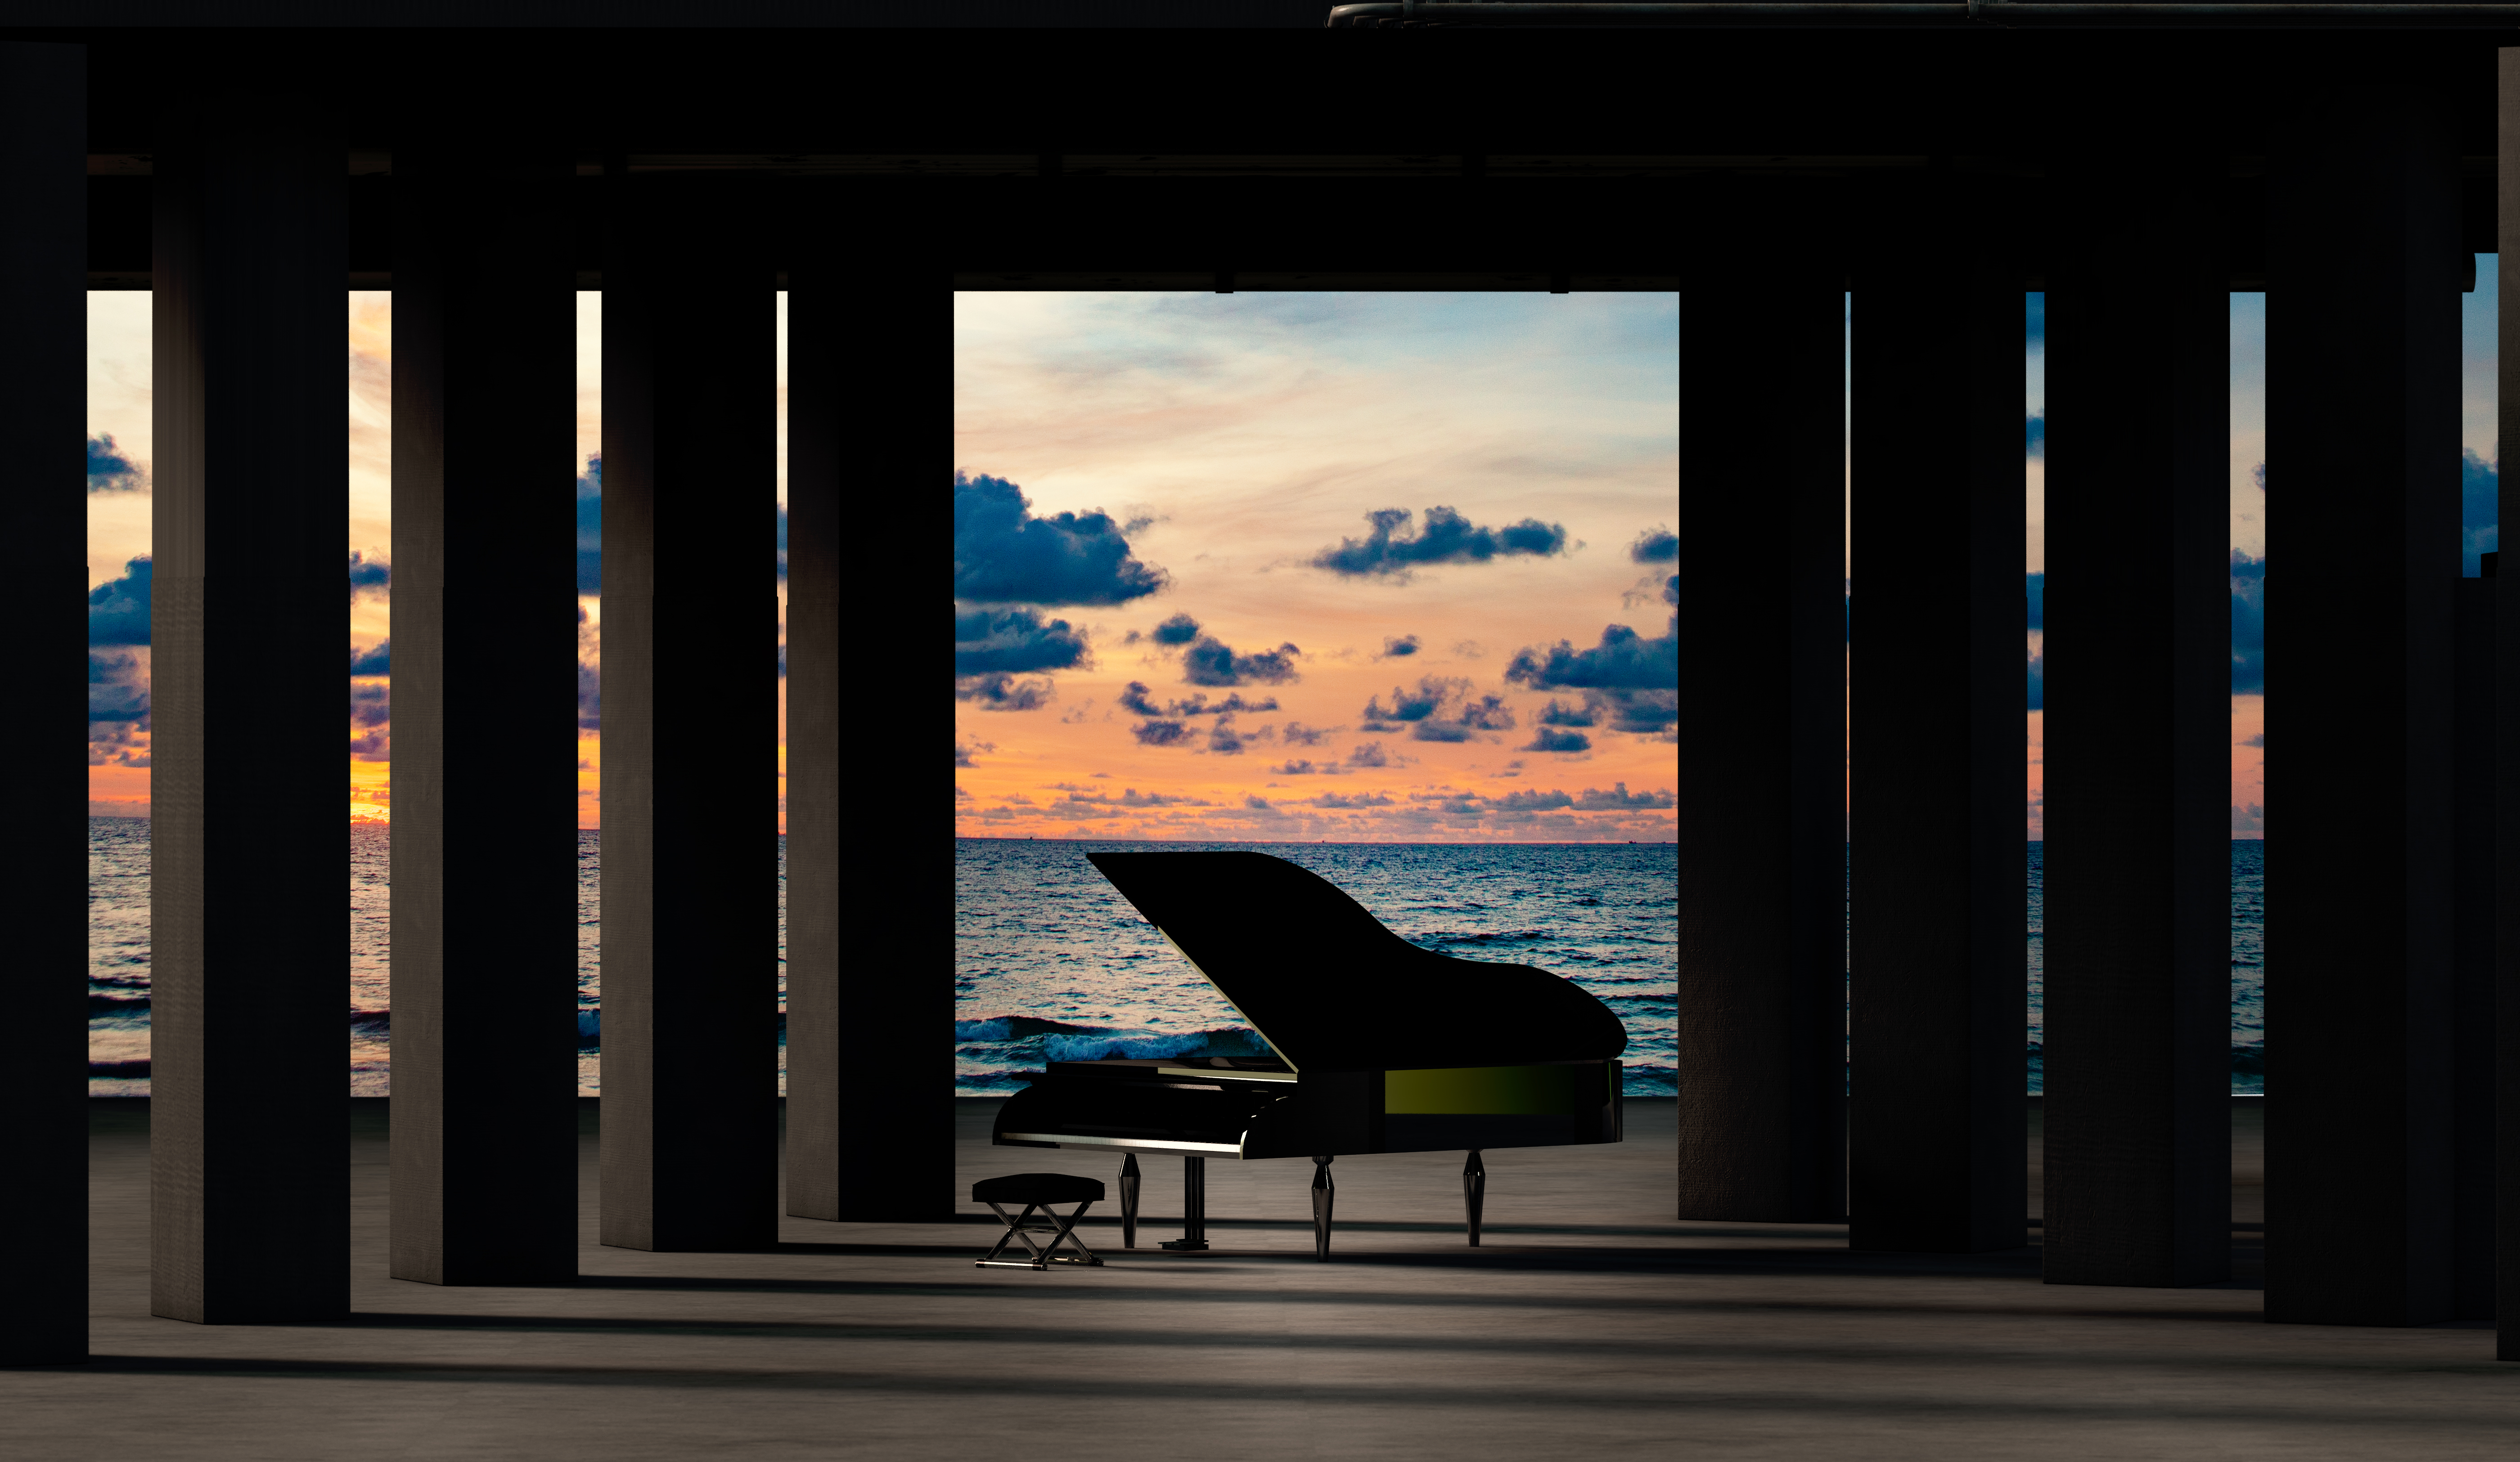 Piano on an outdoor stage